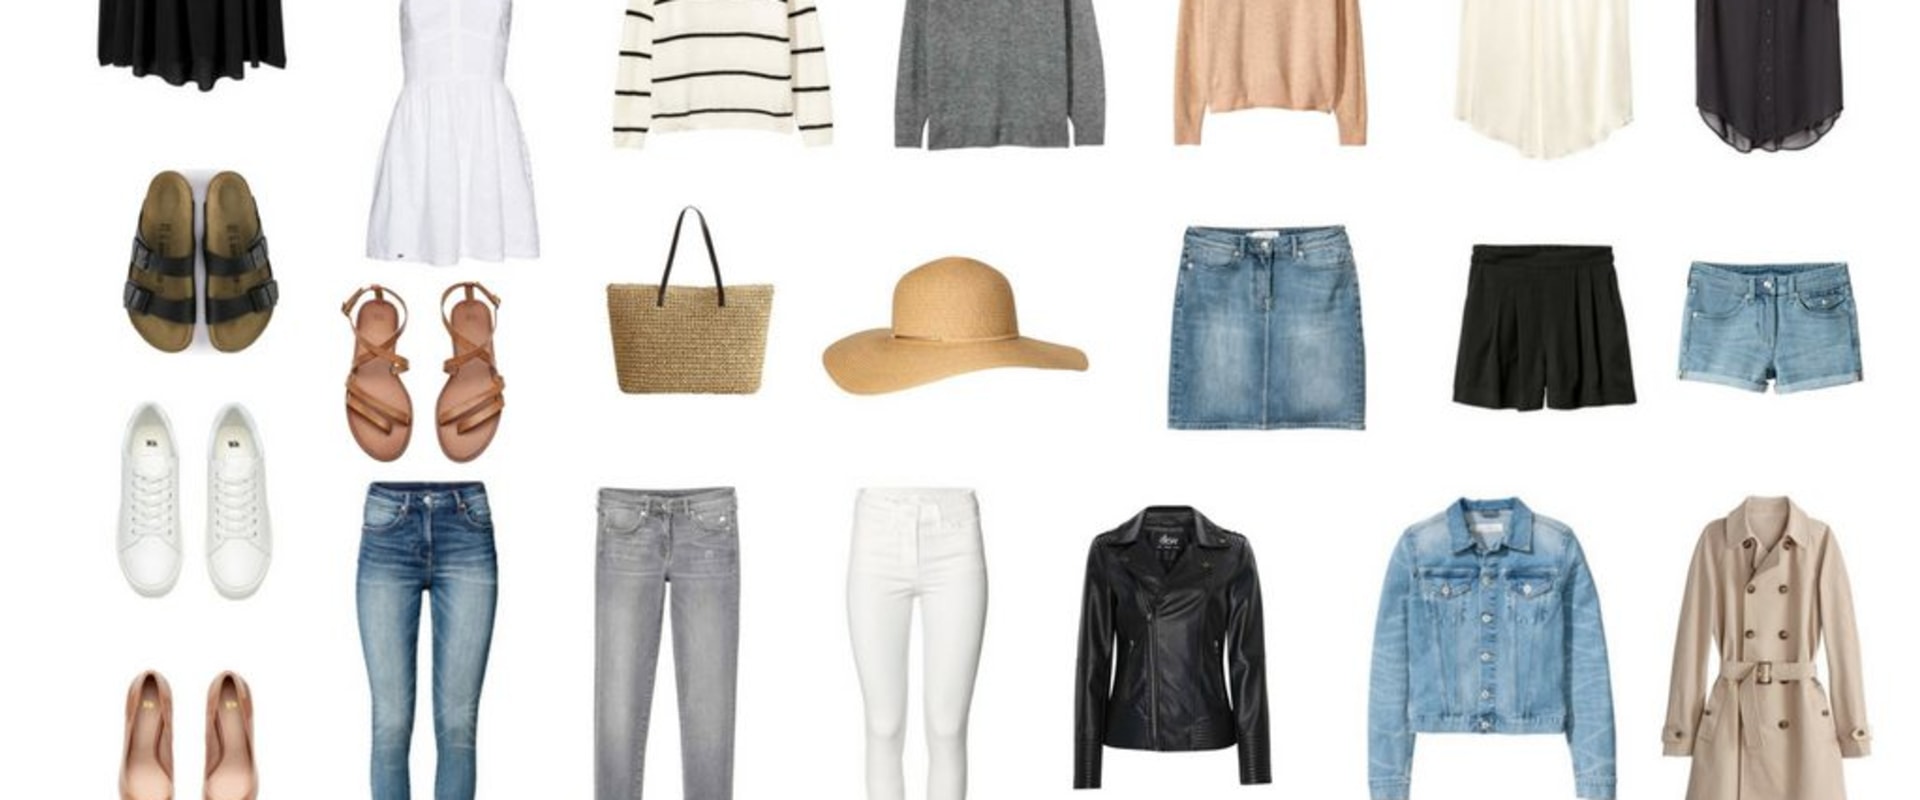 Creating a Capsule Wardrobe - A Step-by-Step Guide